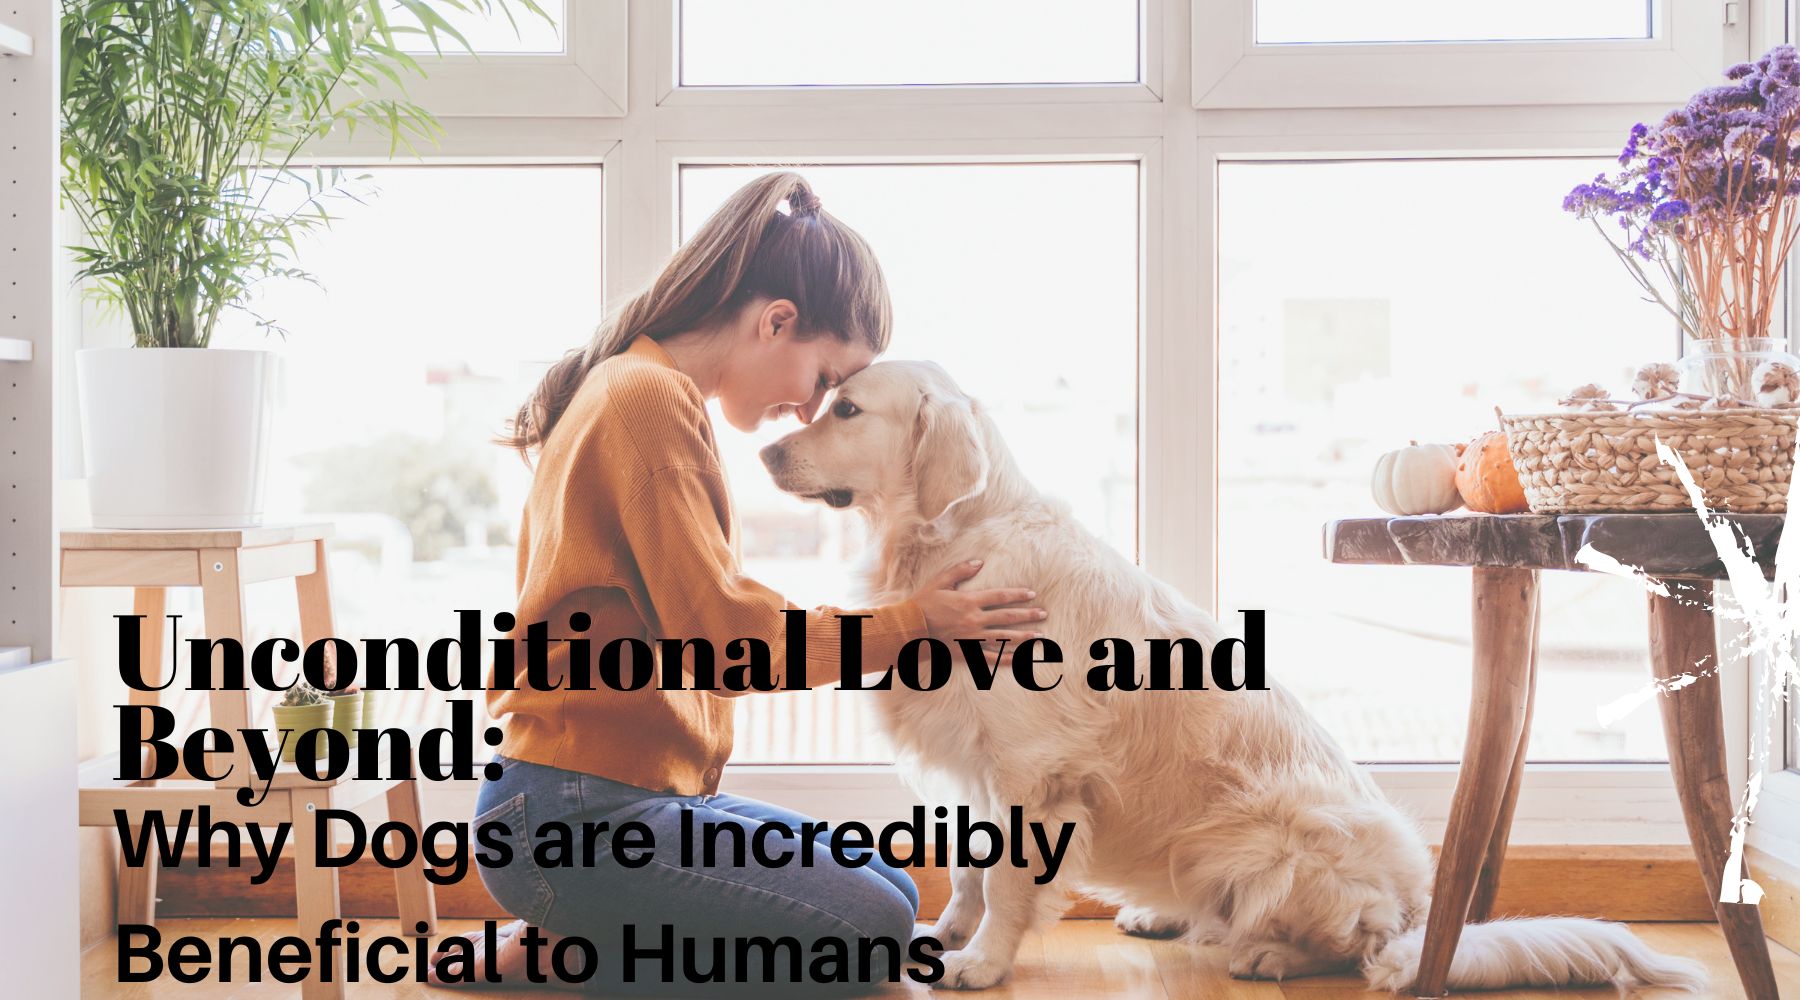 Unconditional Love and Beyond: Why Dogs are Incredibly Beneficial to Humans